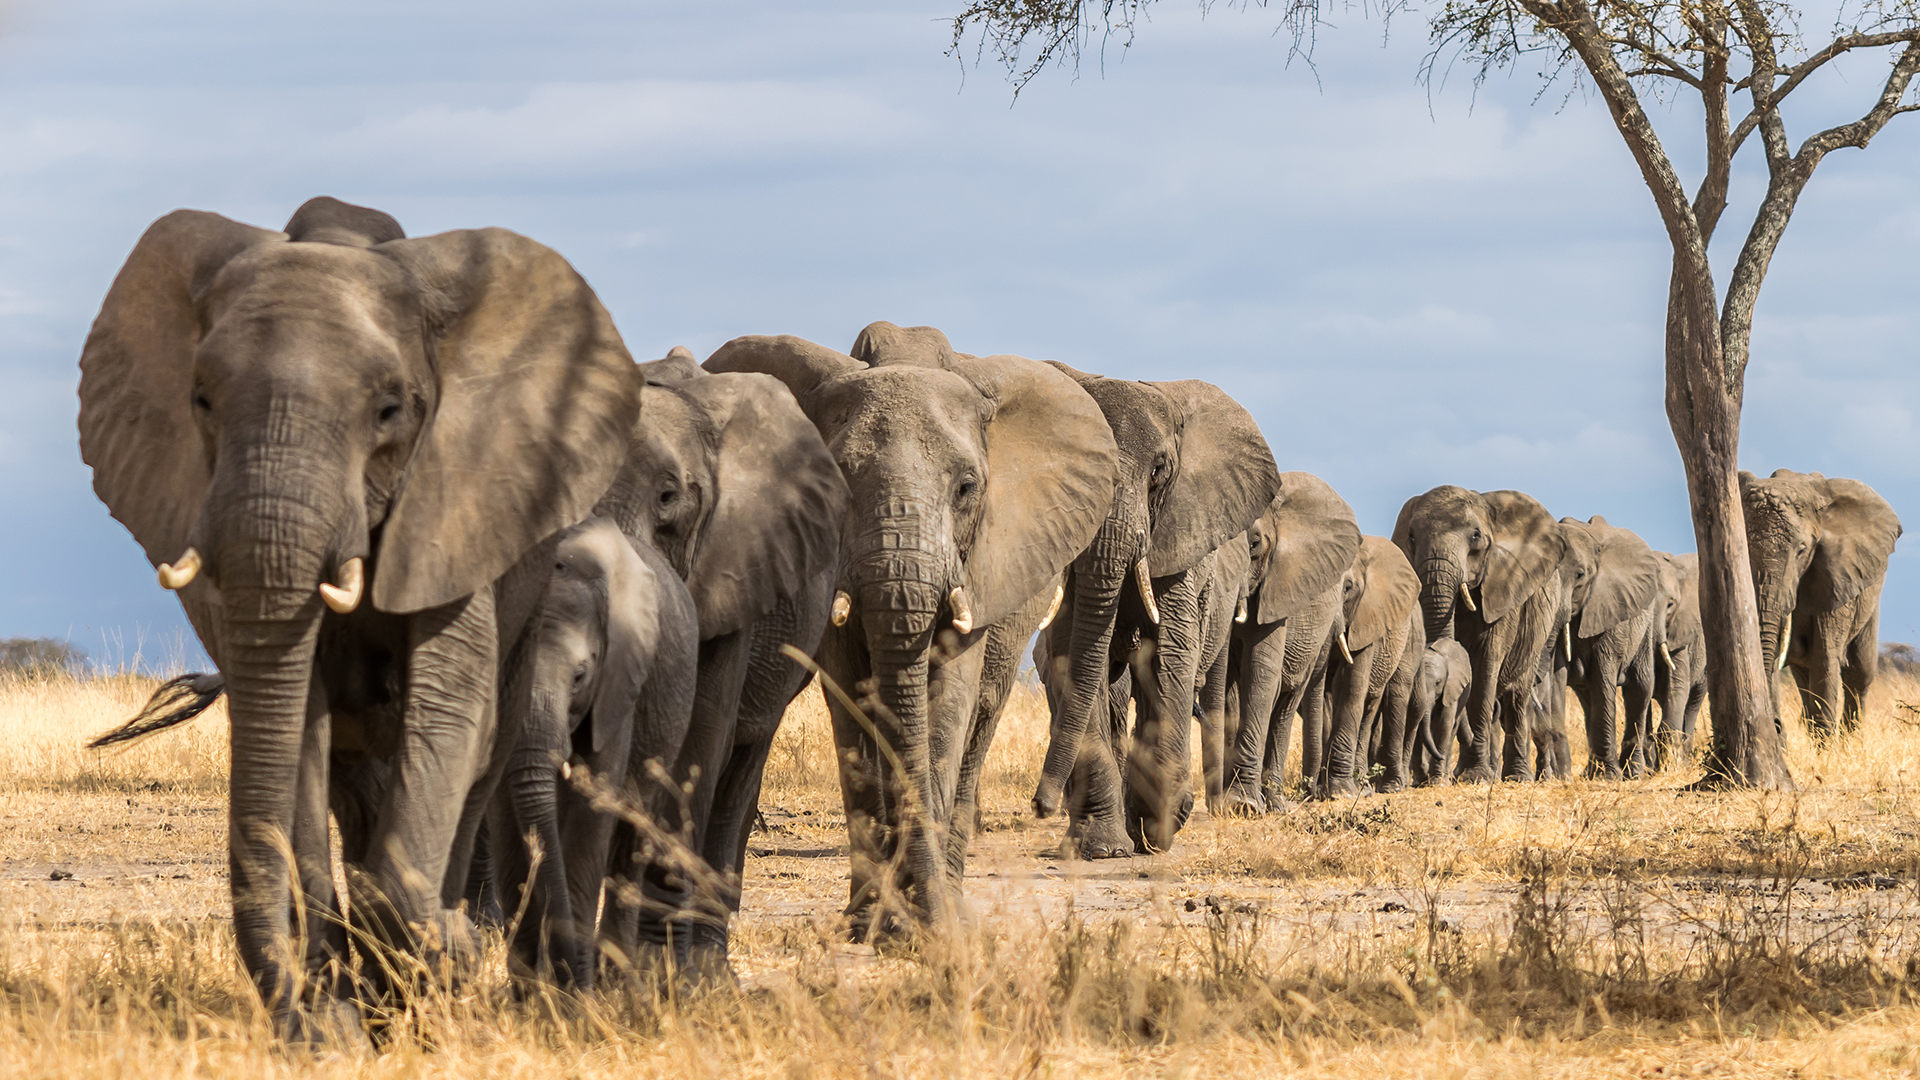 The best four places to see elephants in Tanzania